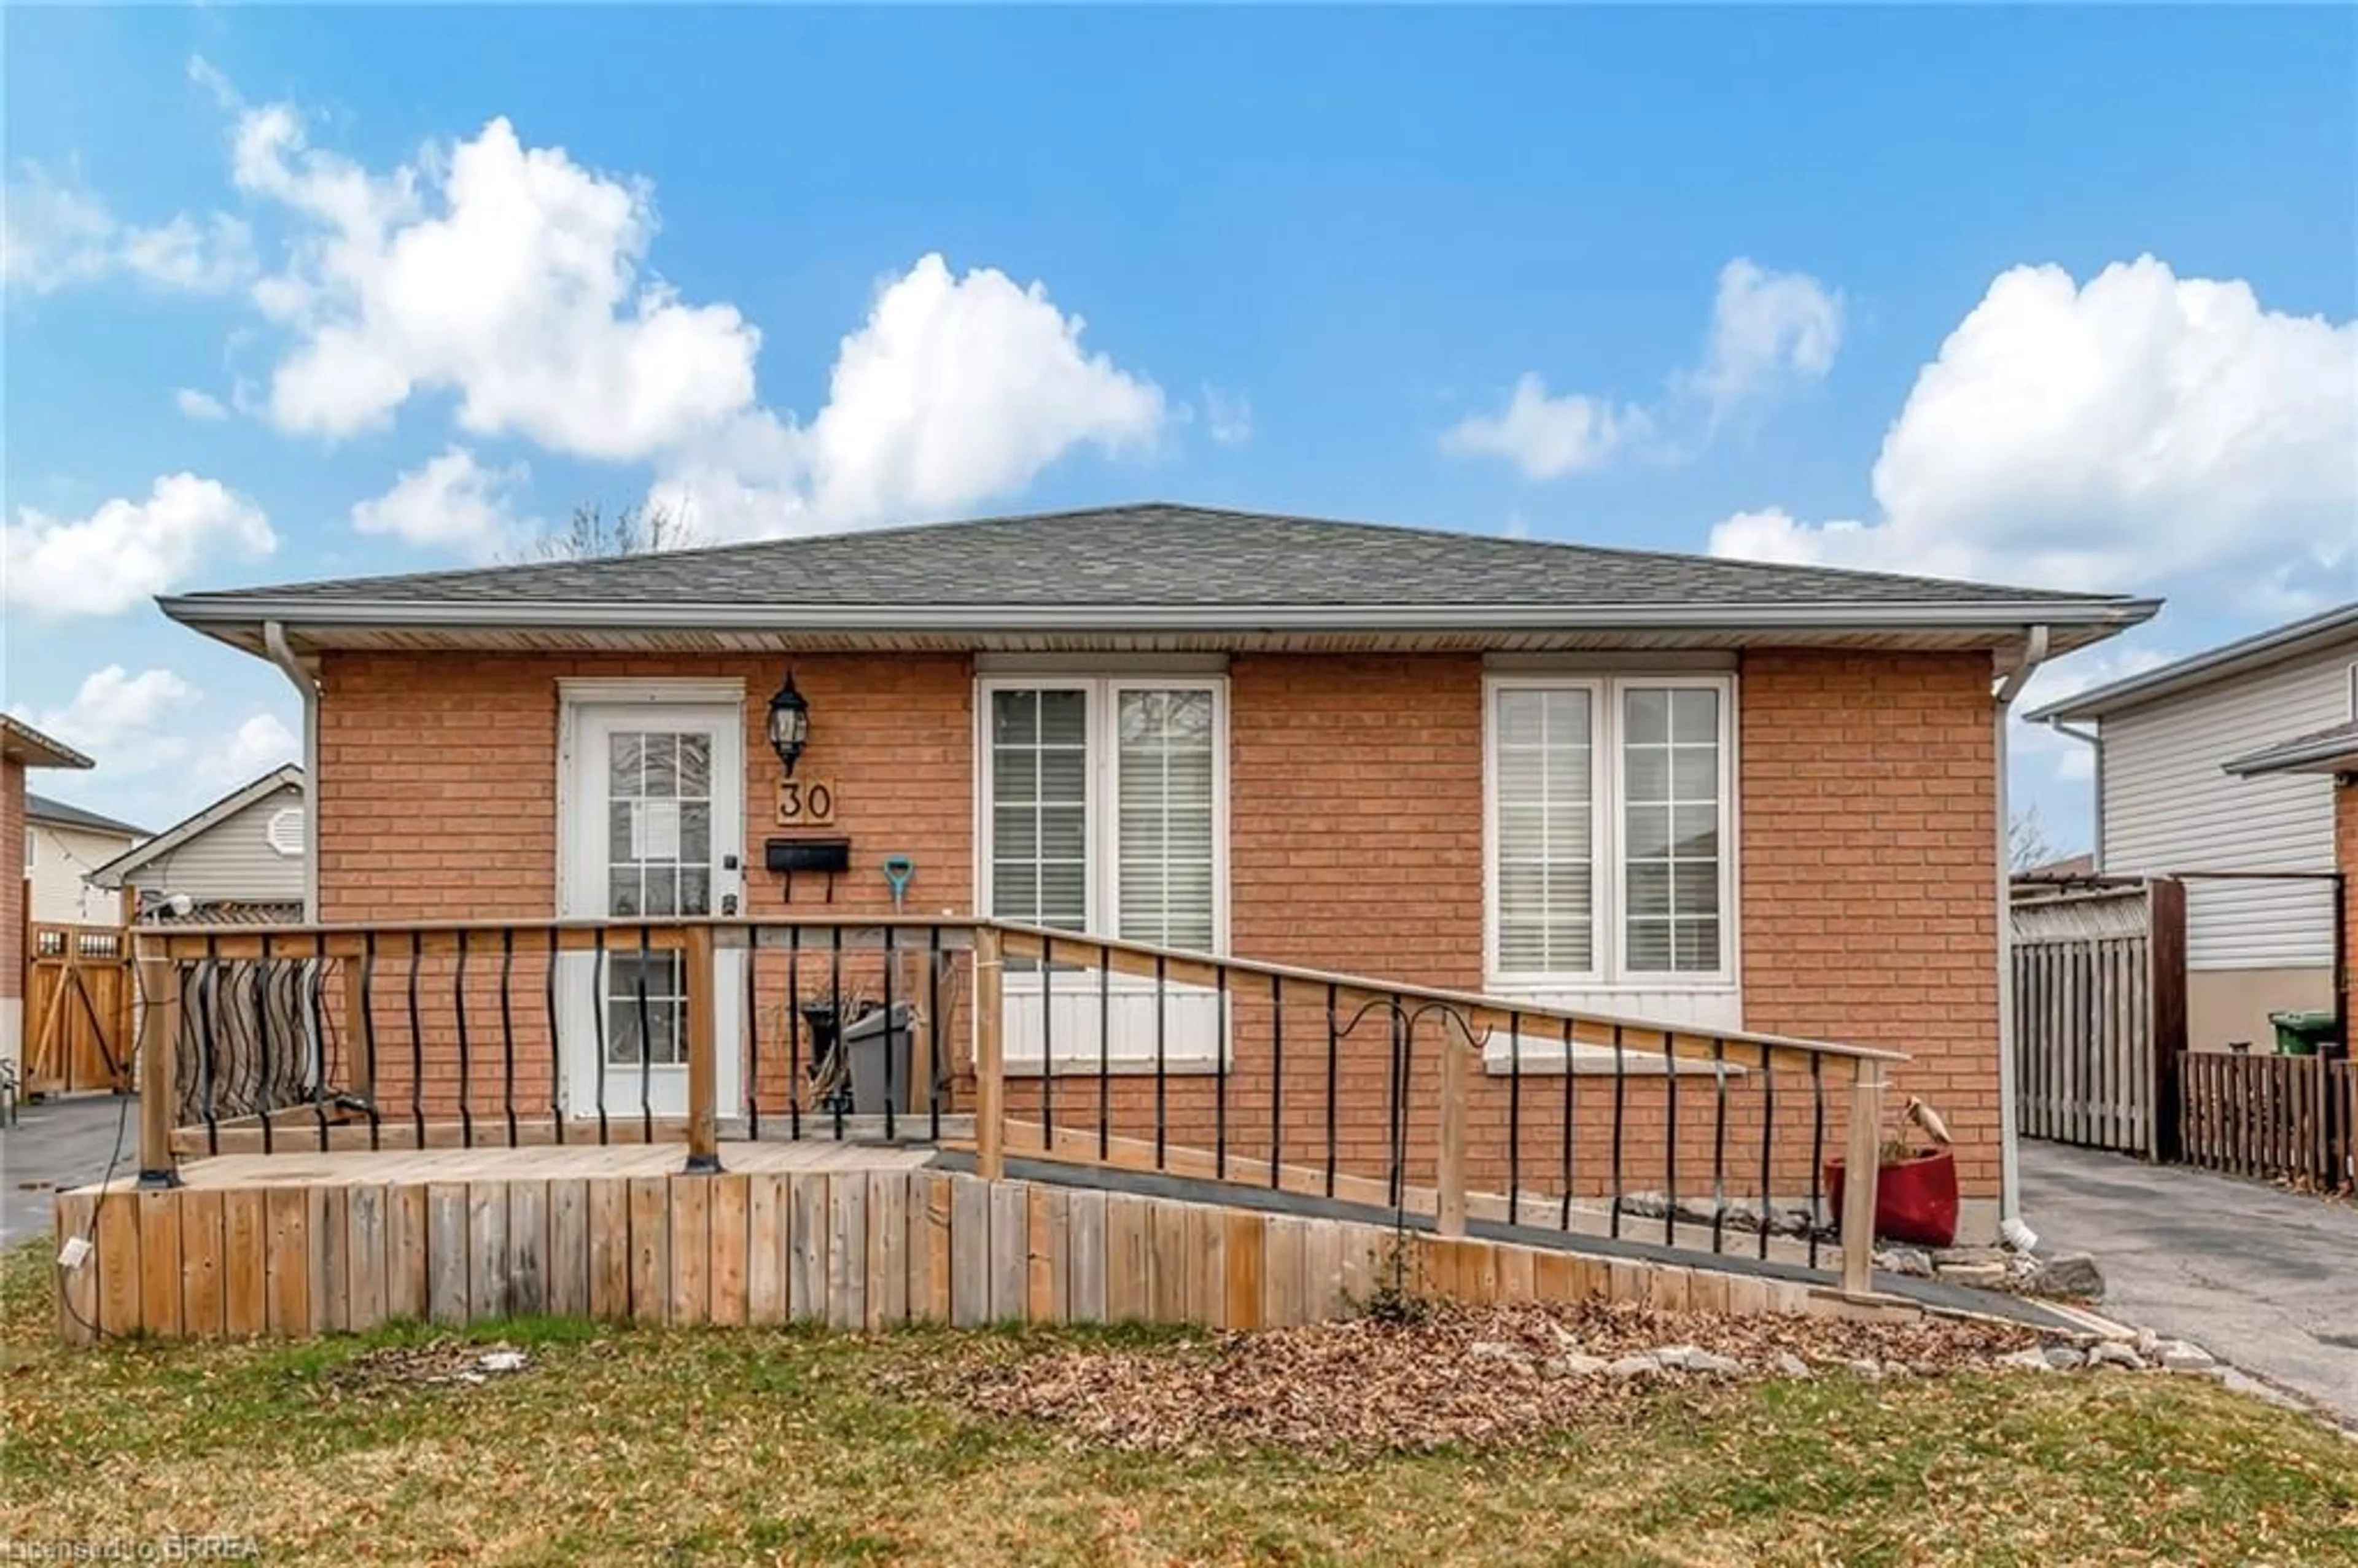 Home with brick exterior material for 30 Featherwood Cres, Stoney Creek Ontario L8J 3P6